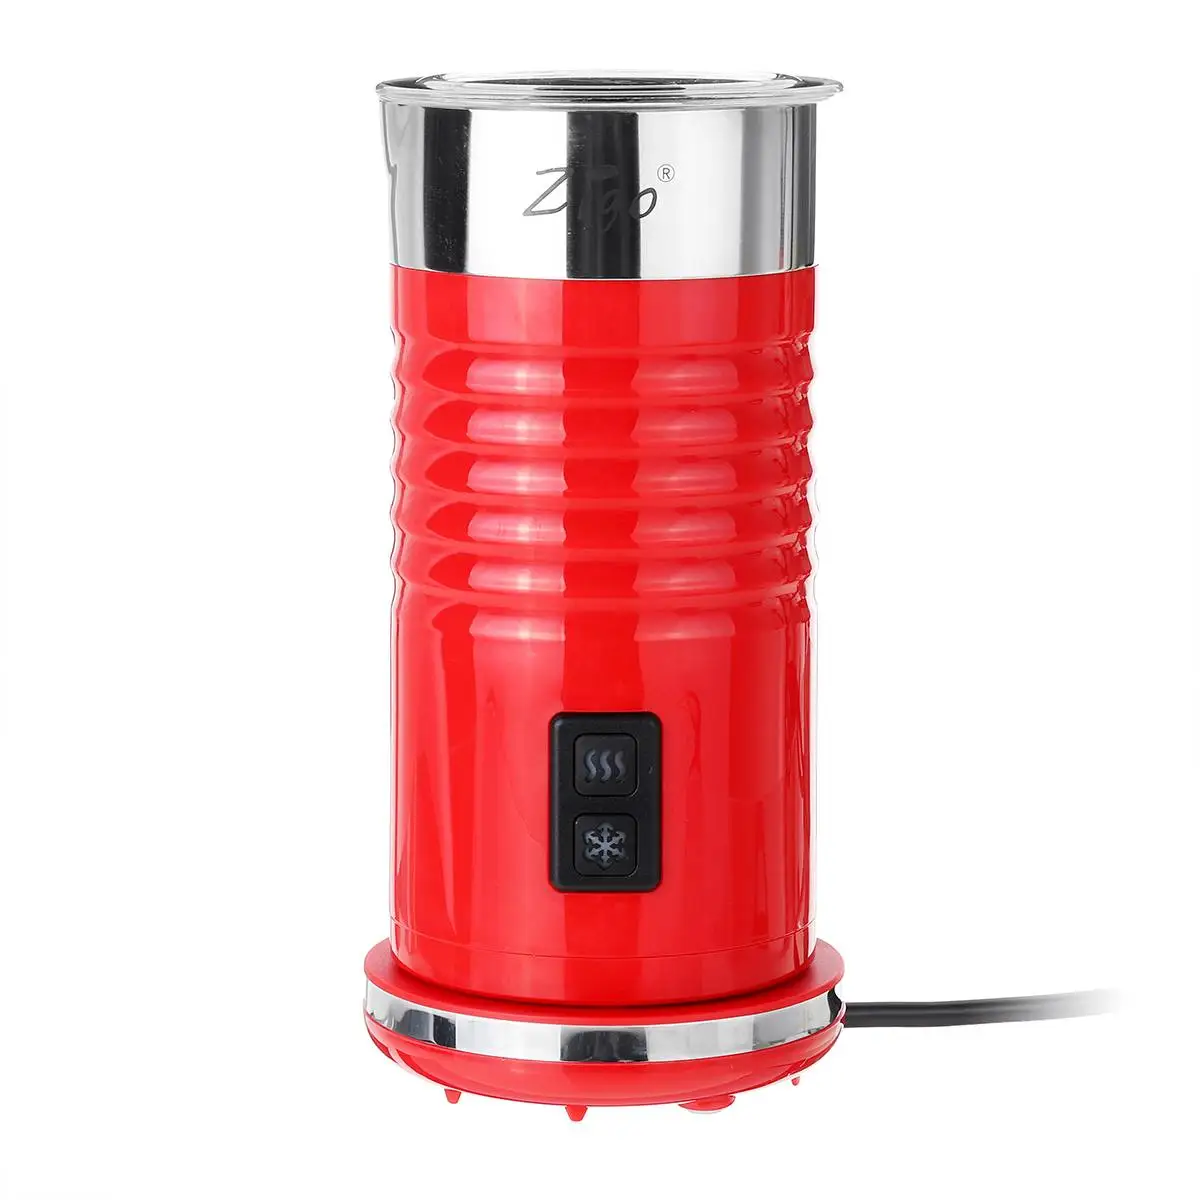 220V Electric Hot / Cold Milk Frother Foamer Warmer Latte Cappuccino Coffee Temperature Keeping with Pull Cup Flower Needle Tool - Цвет: Red